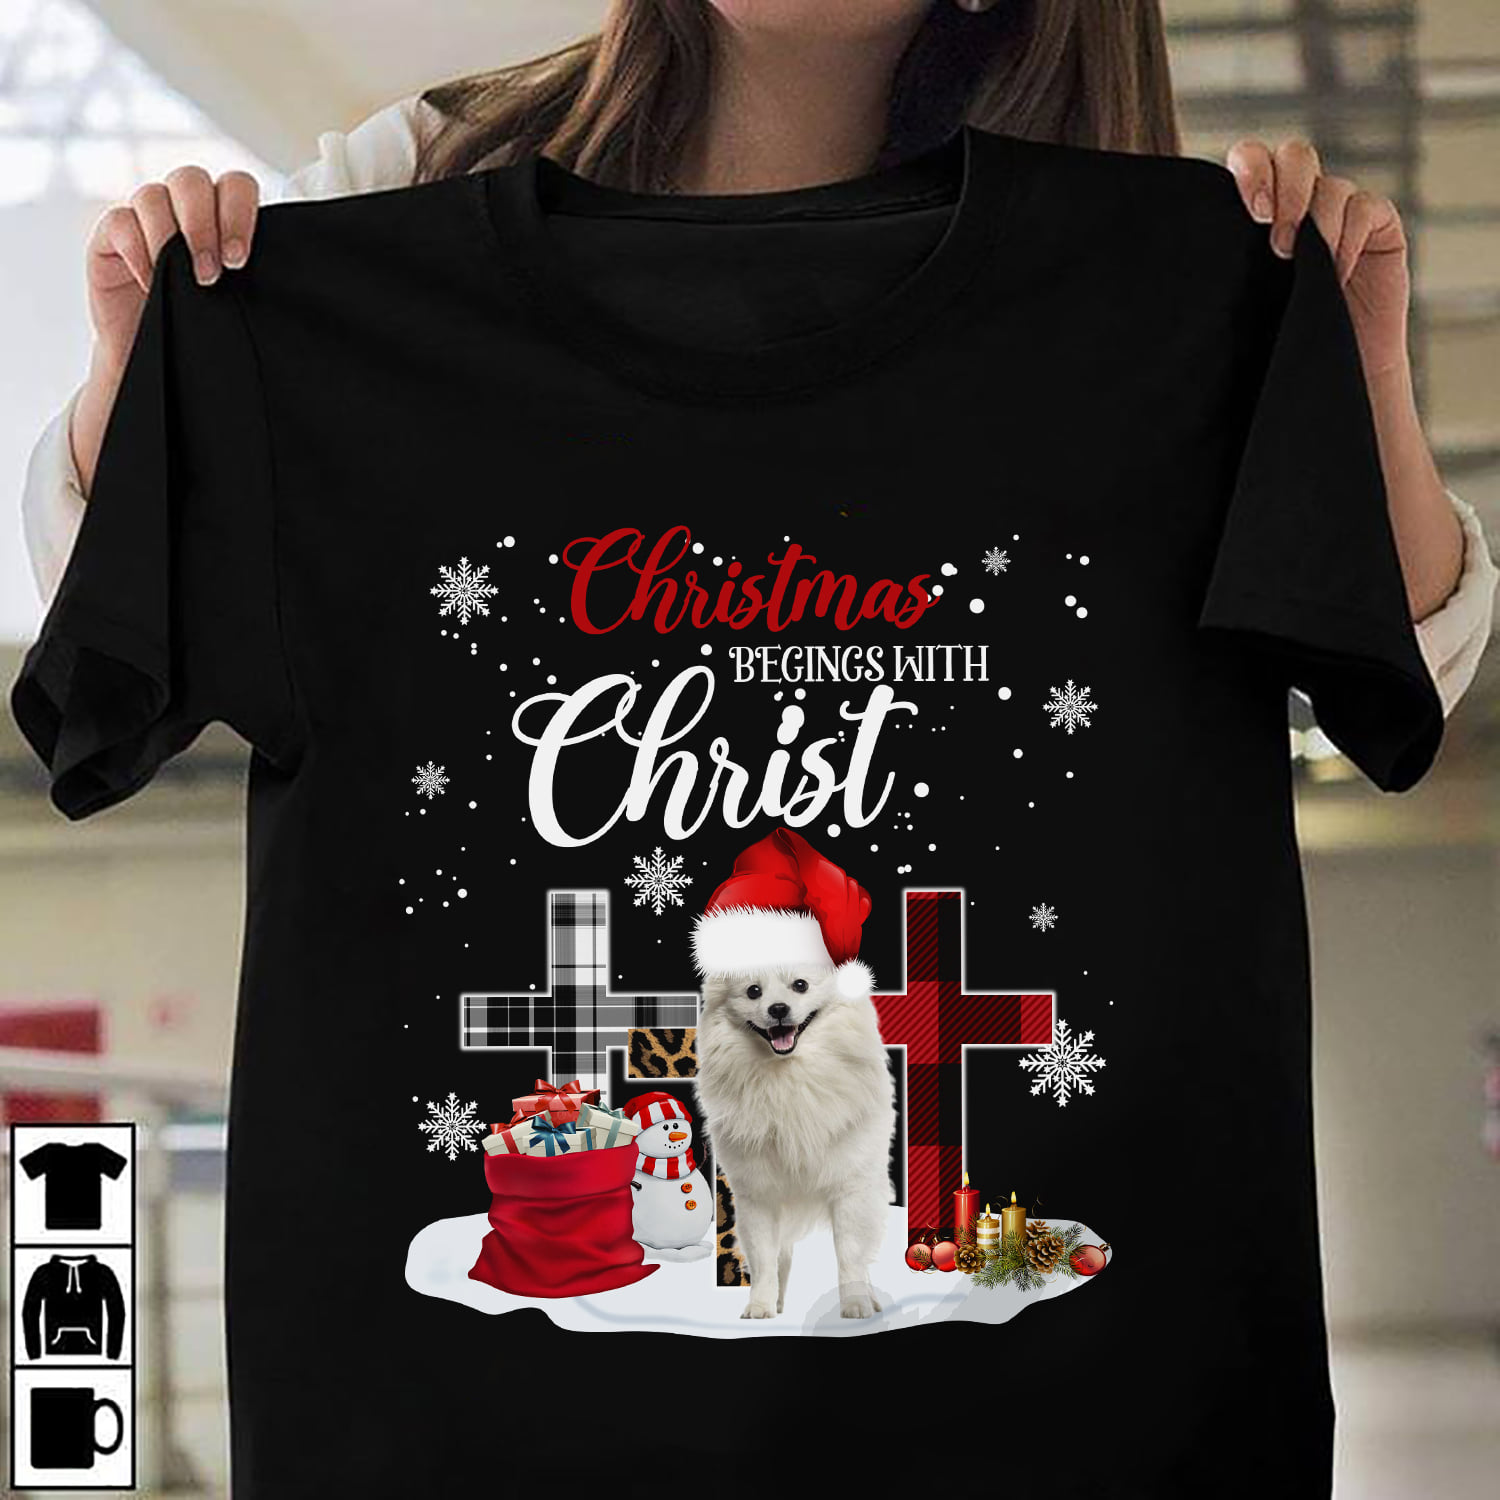 Christmas begin with Christ - White Pomeranian dog, Christmas day ugly sweater